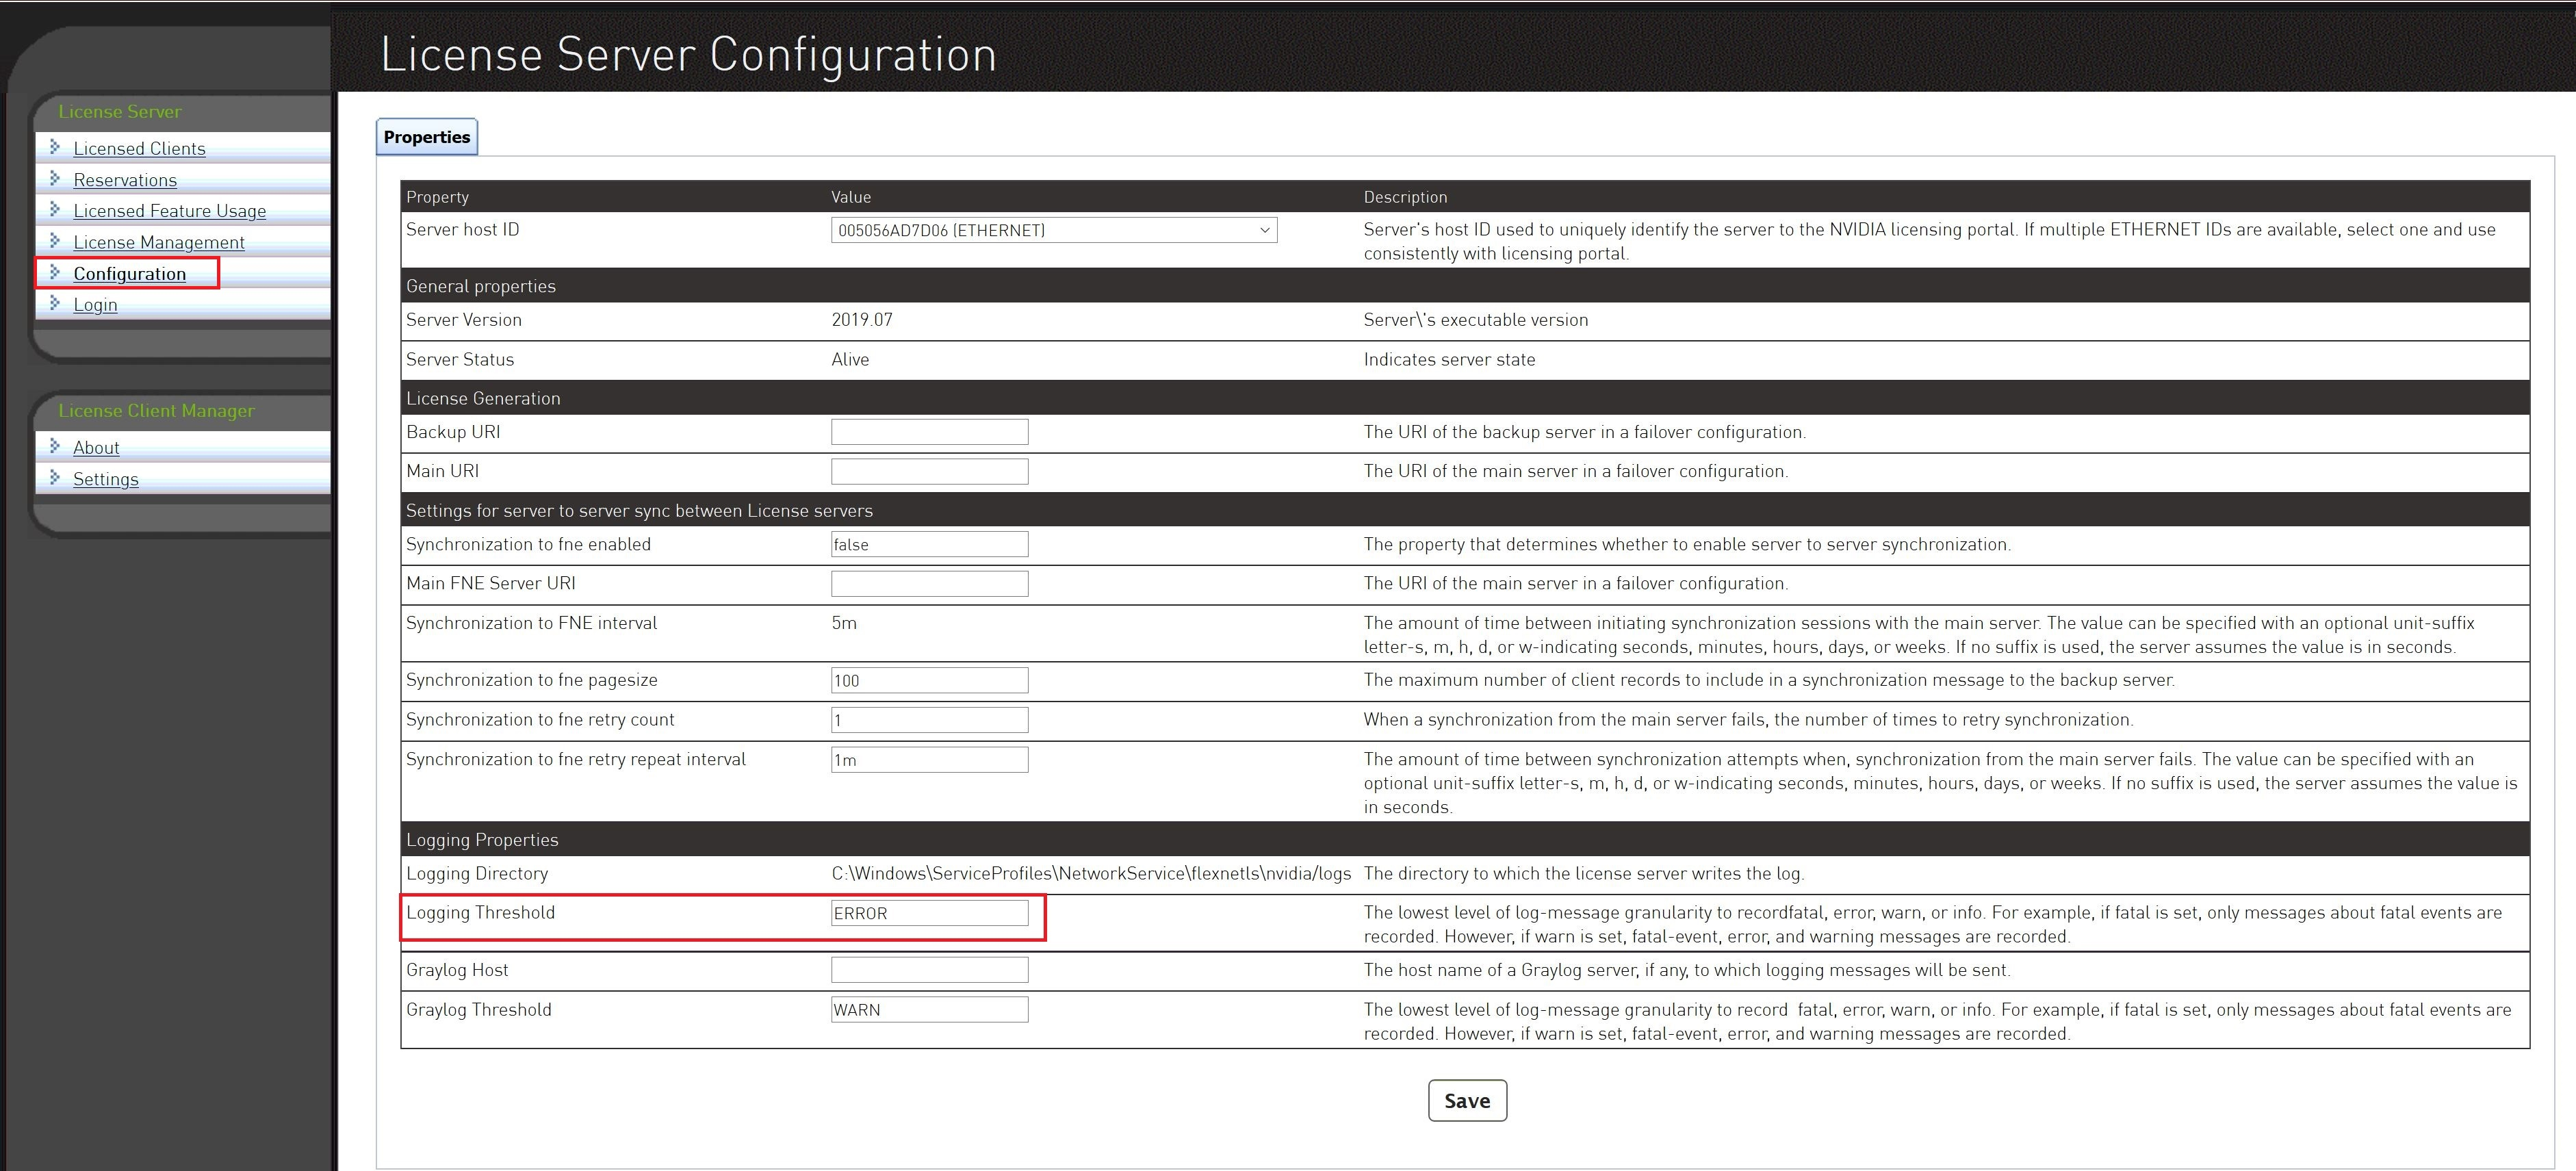 Screen capture showing the License Server Configuration page with the Logging Threshold field highlighted.